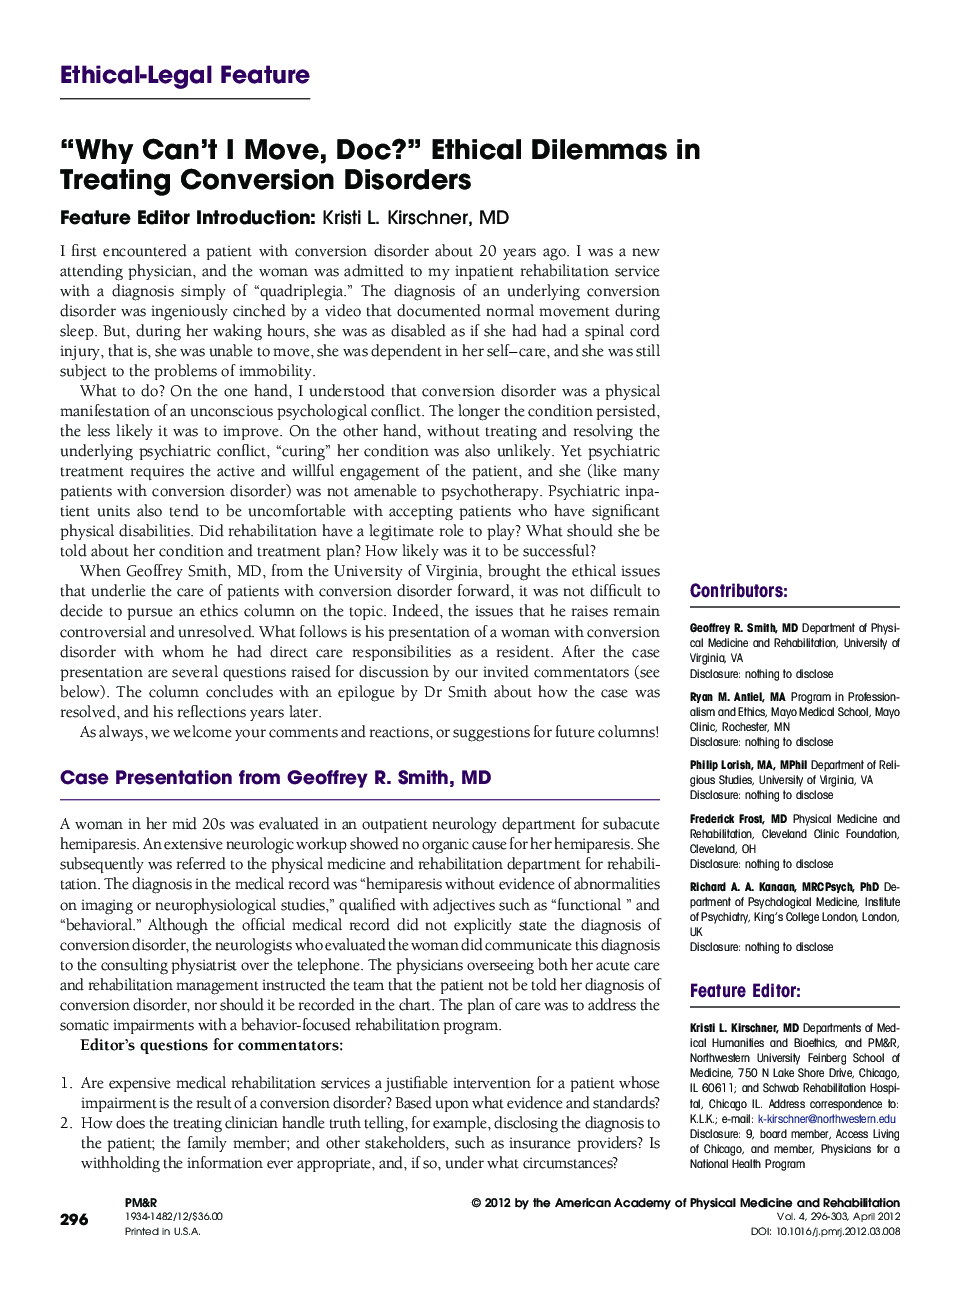 “Why Can't I Move, Doc?” Ethical Dilemmas in Treating Conversion Disorders